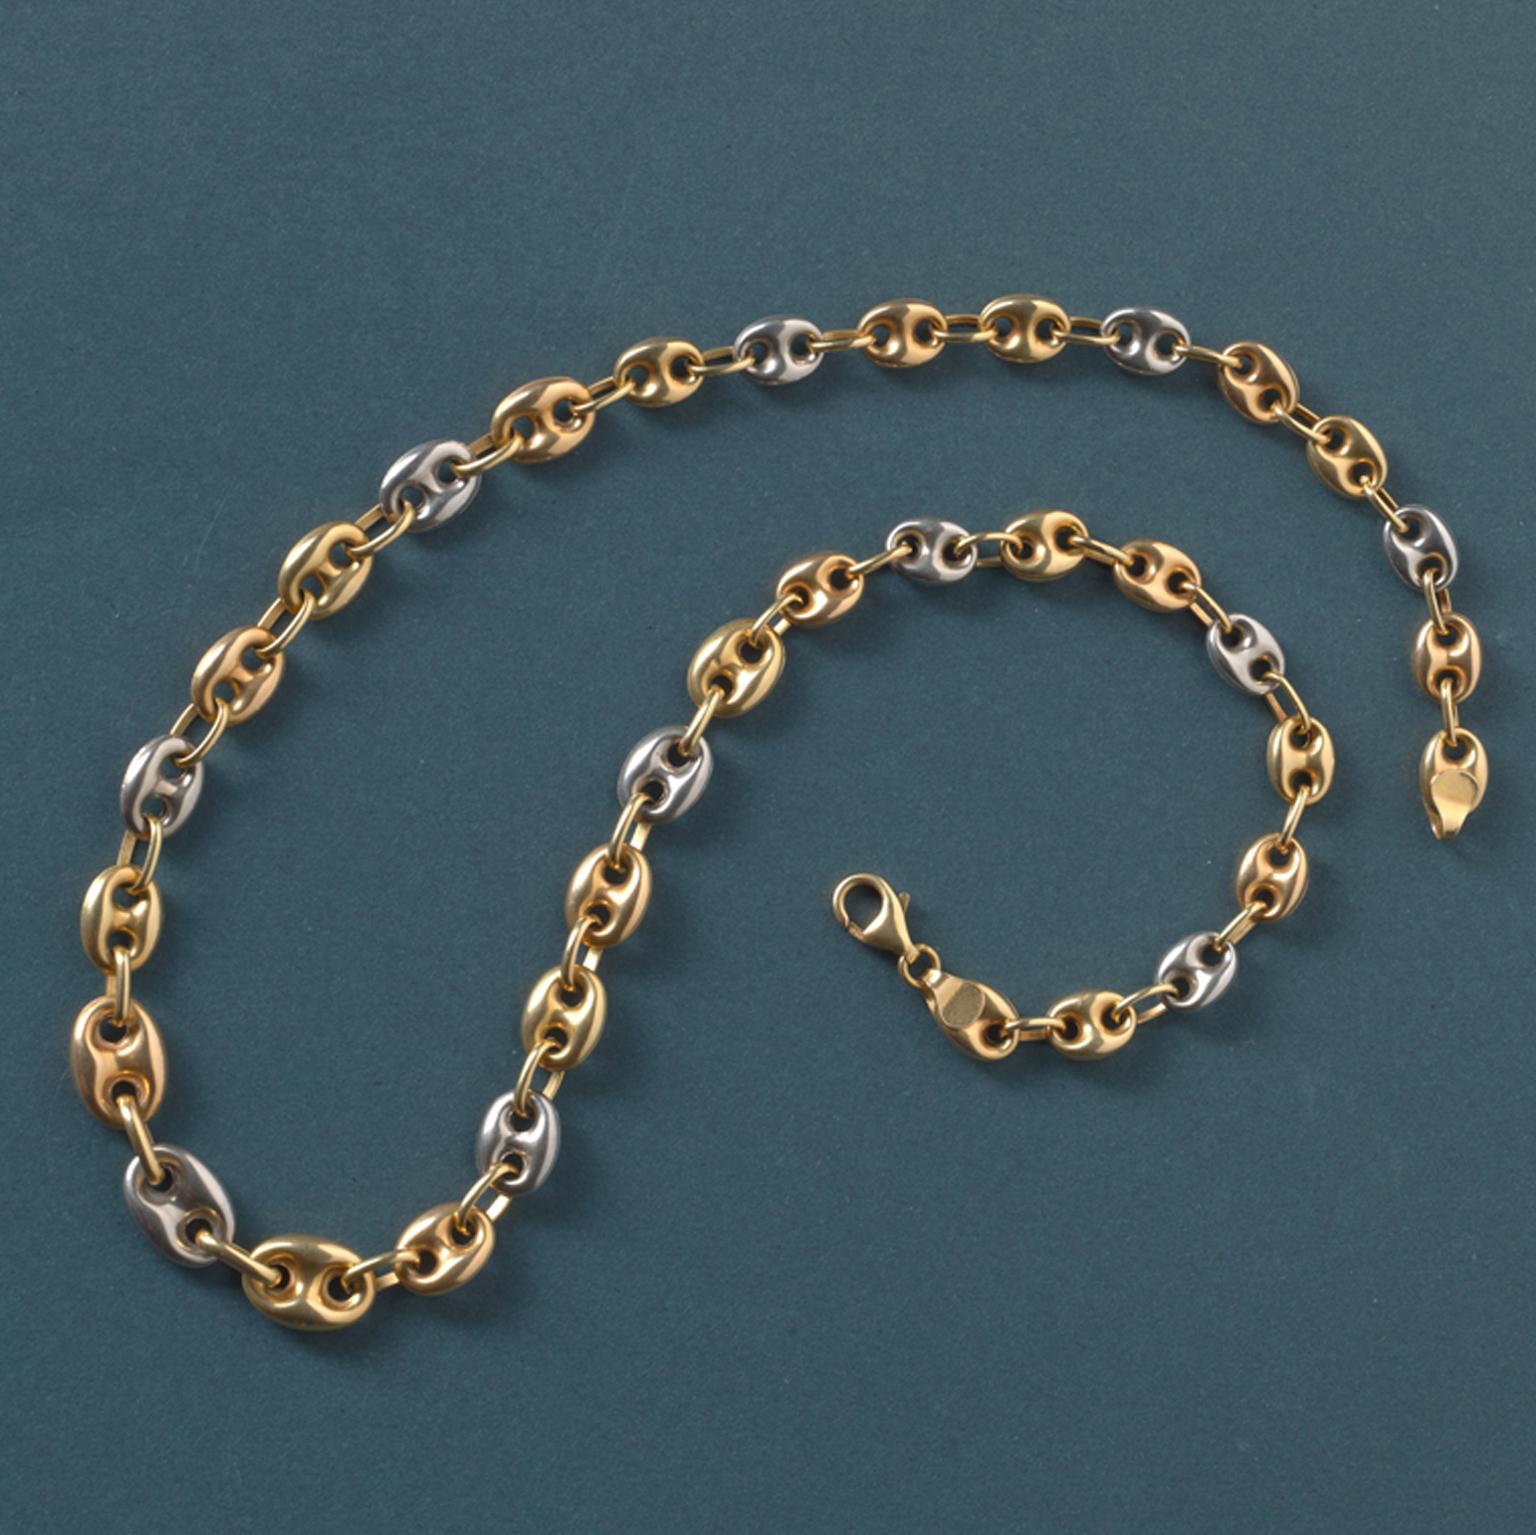 An 18 carat tri-color gold chain with a coffee bean link.

weight chain: 24.5 grams
length chain: 46 cm